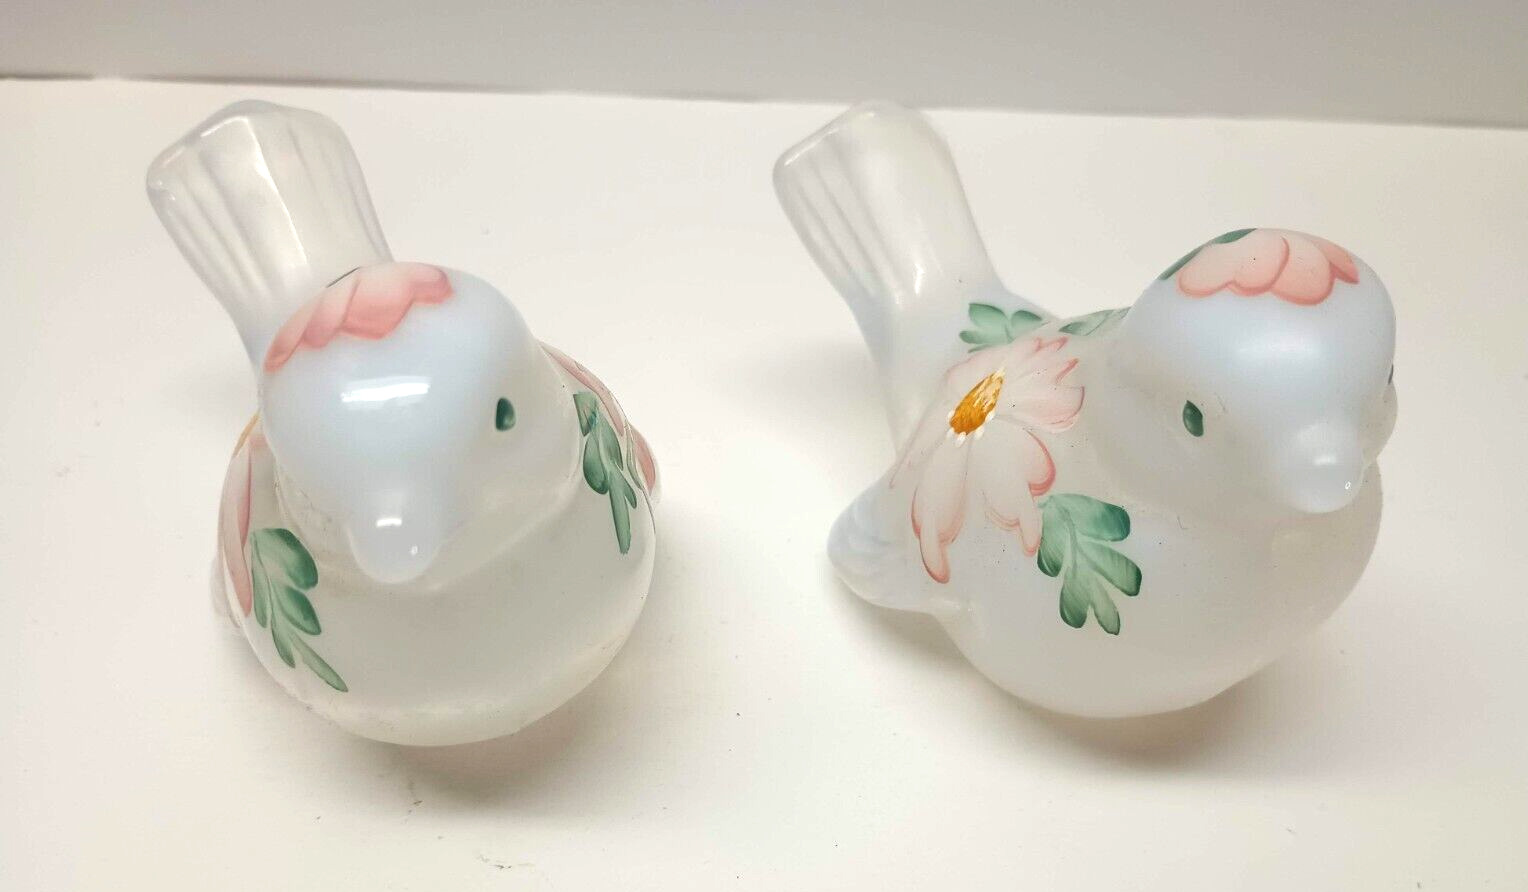 MATCHING PAIR OF Fenton Art Glass Hand Painted Birds by T Gaskins - Heavy